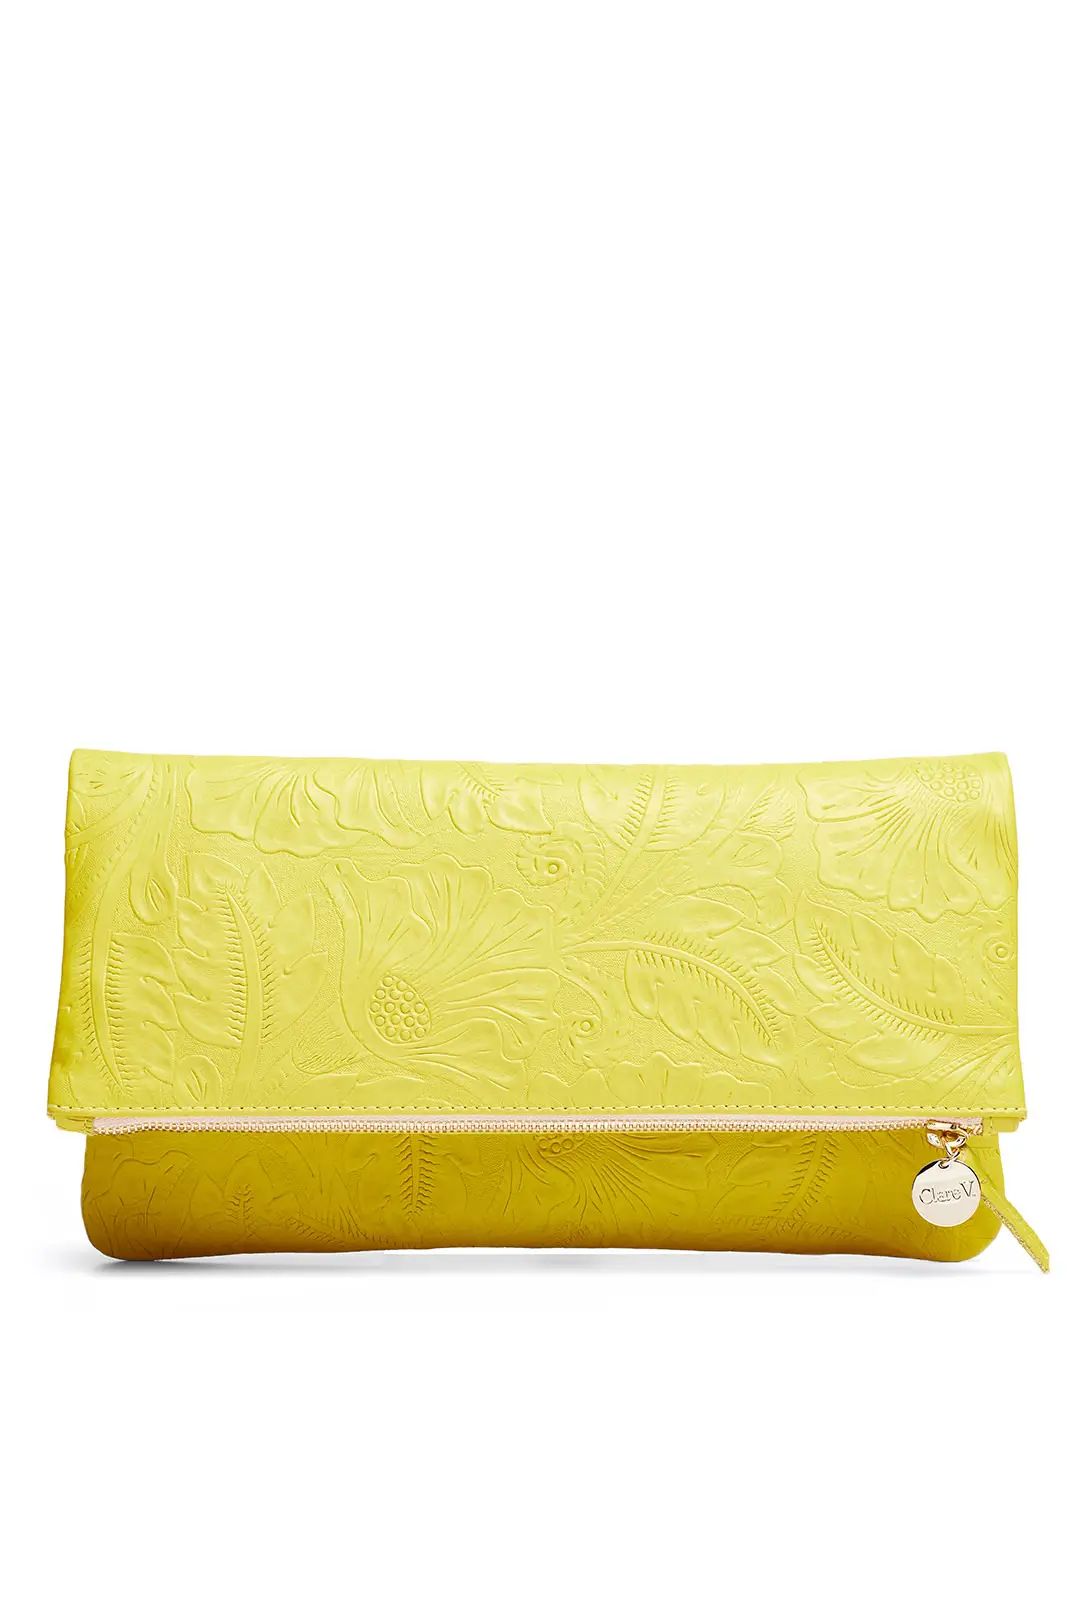 Clare V. Yellow Foldover Clutch | Rent The Runway